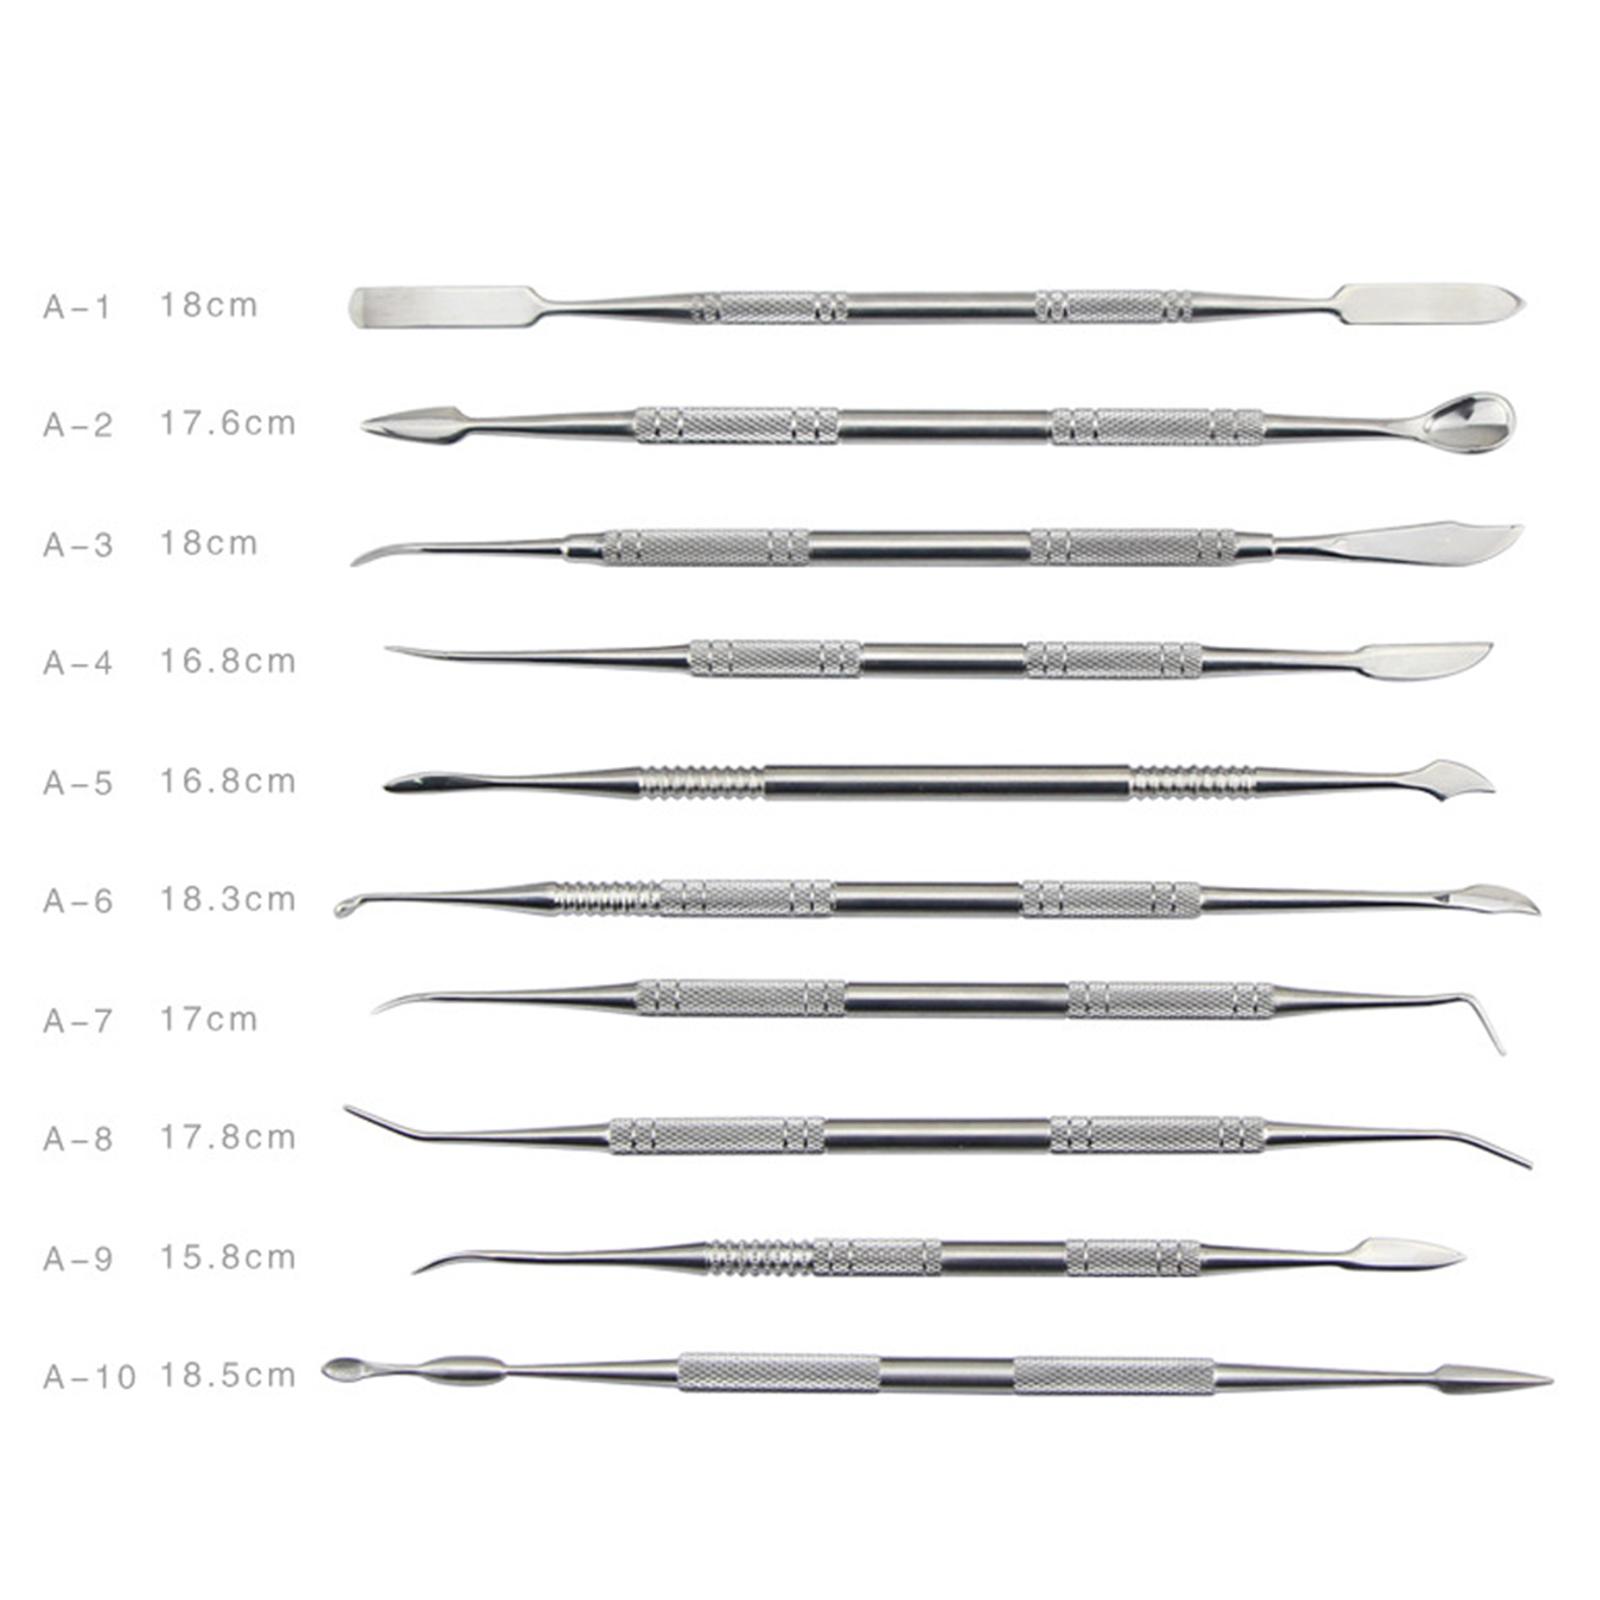 10x DIY Art Modeling Carving Tools Clay Ceramic Pottery Sculpture Wax Knives